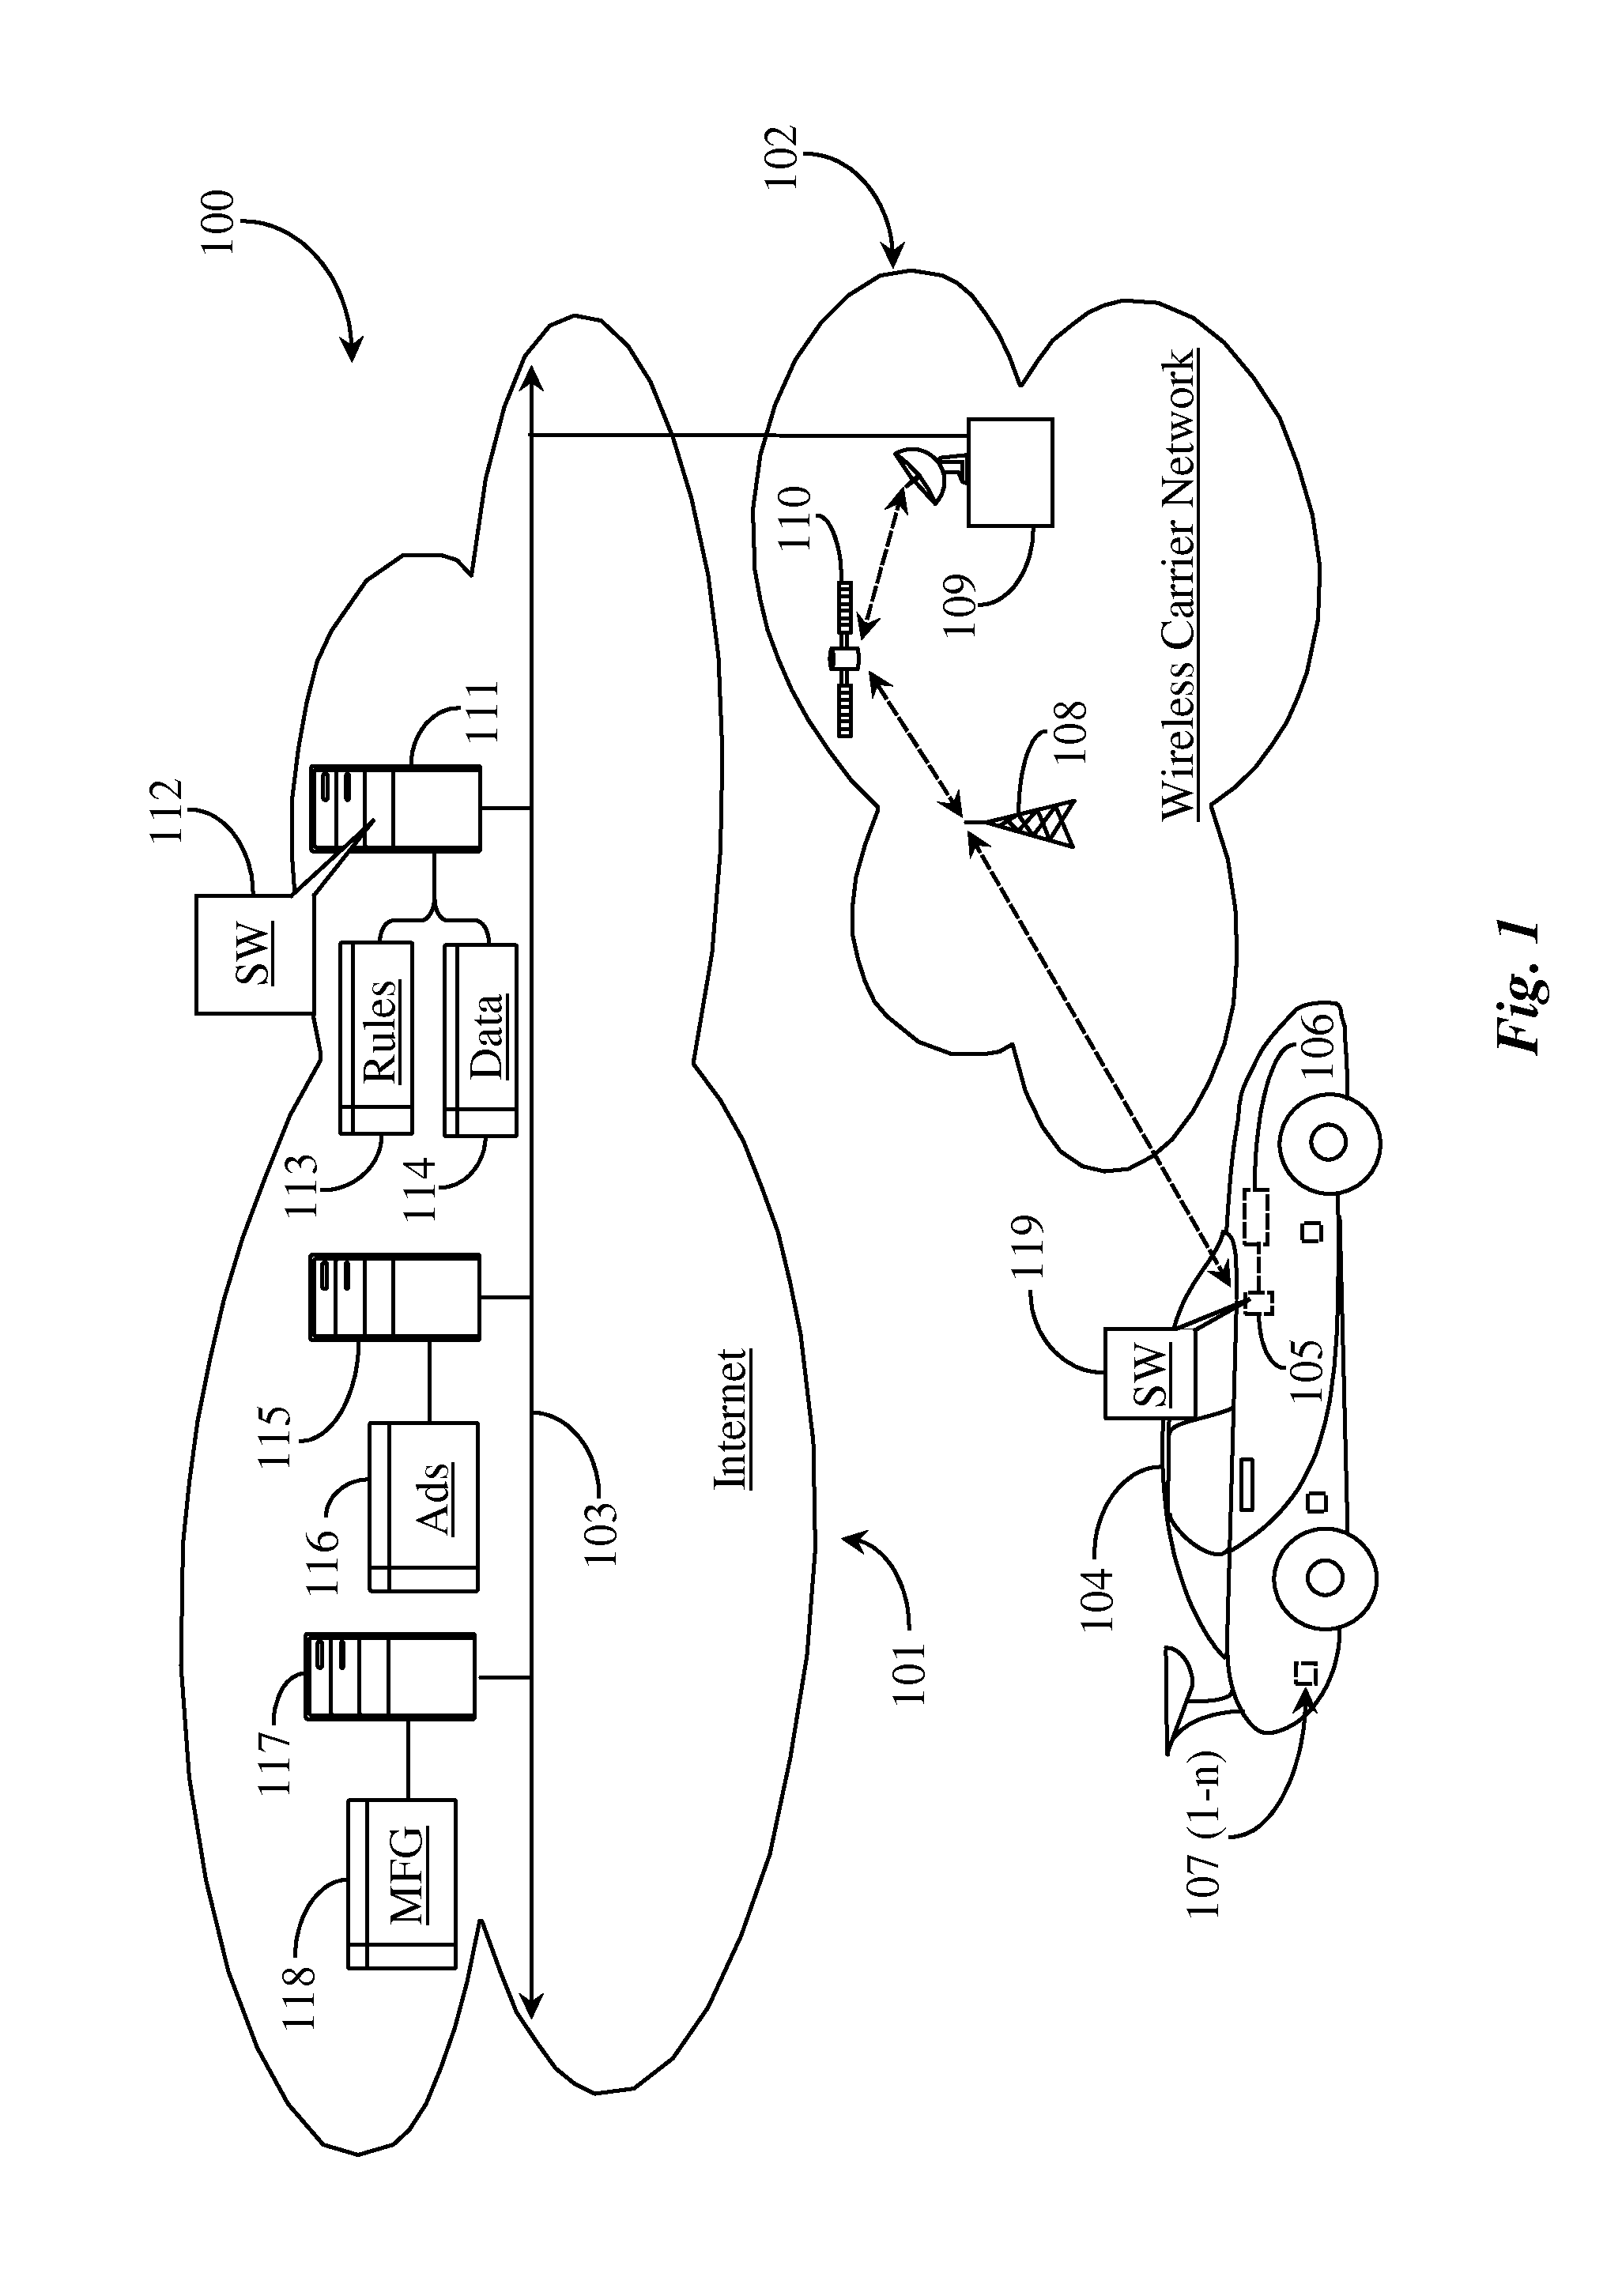 Vehicle Referral System and Service